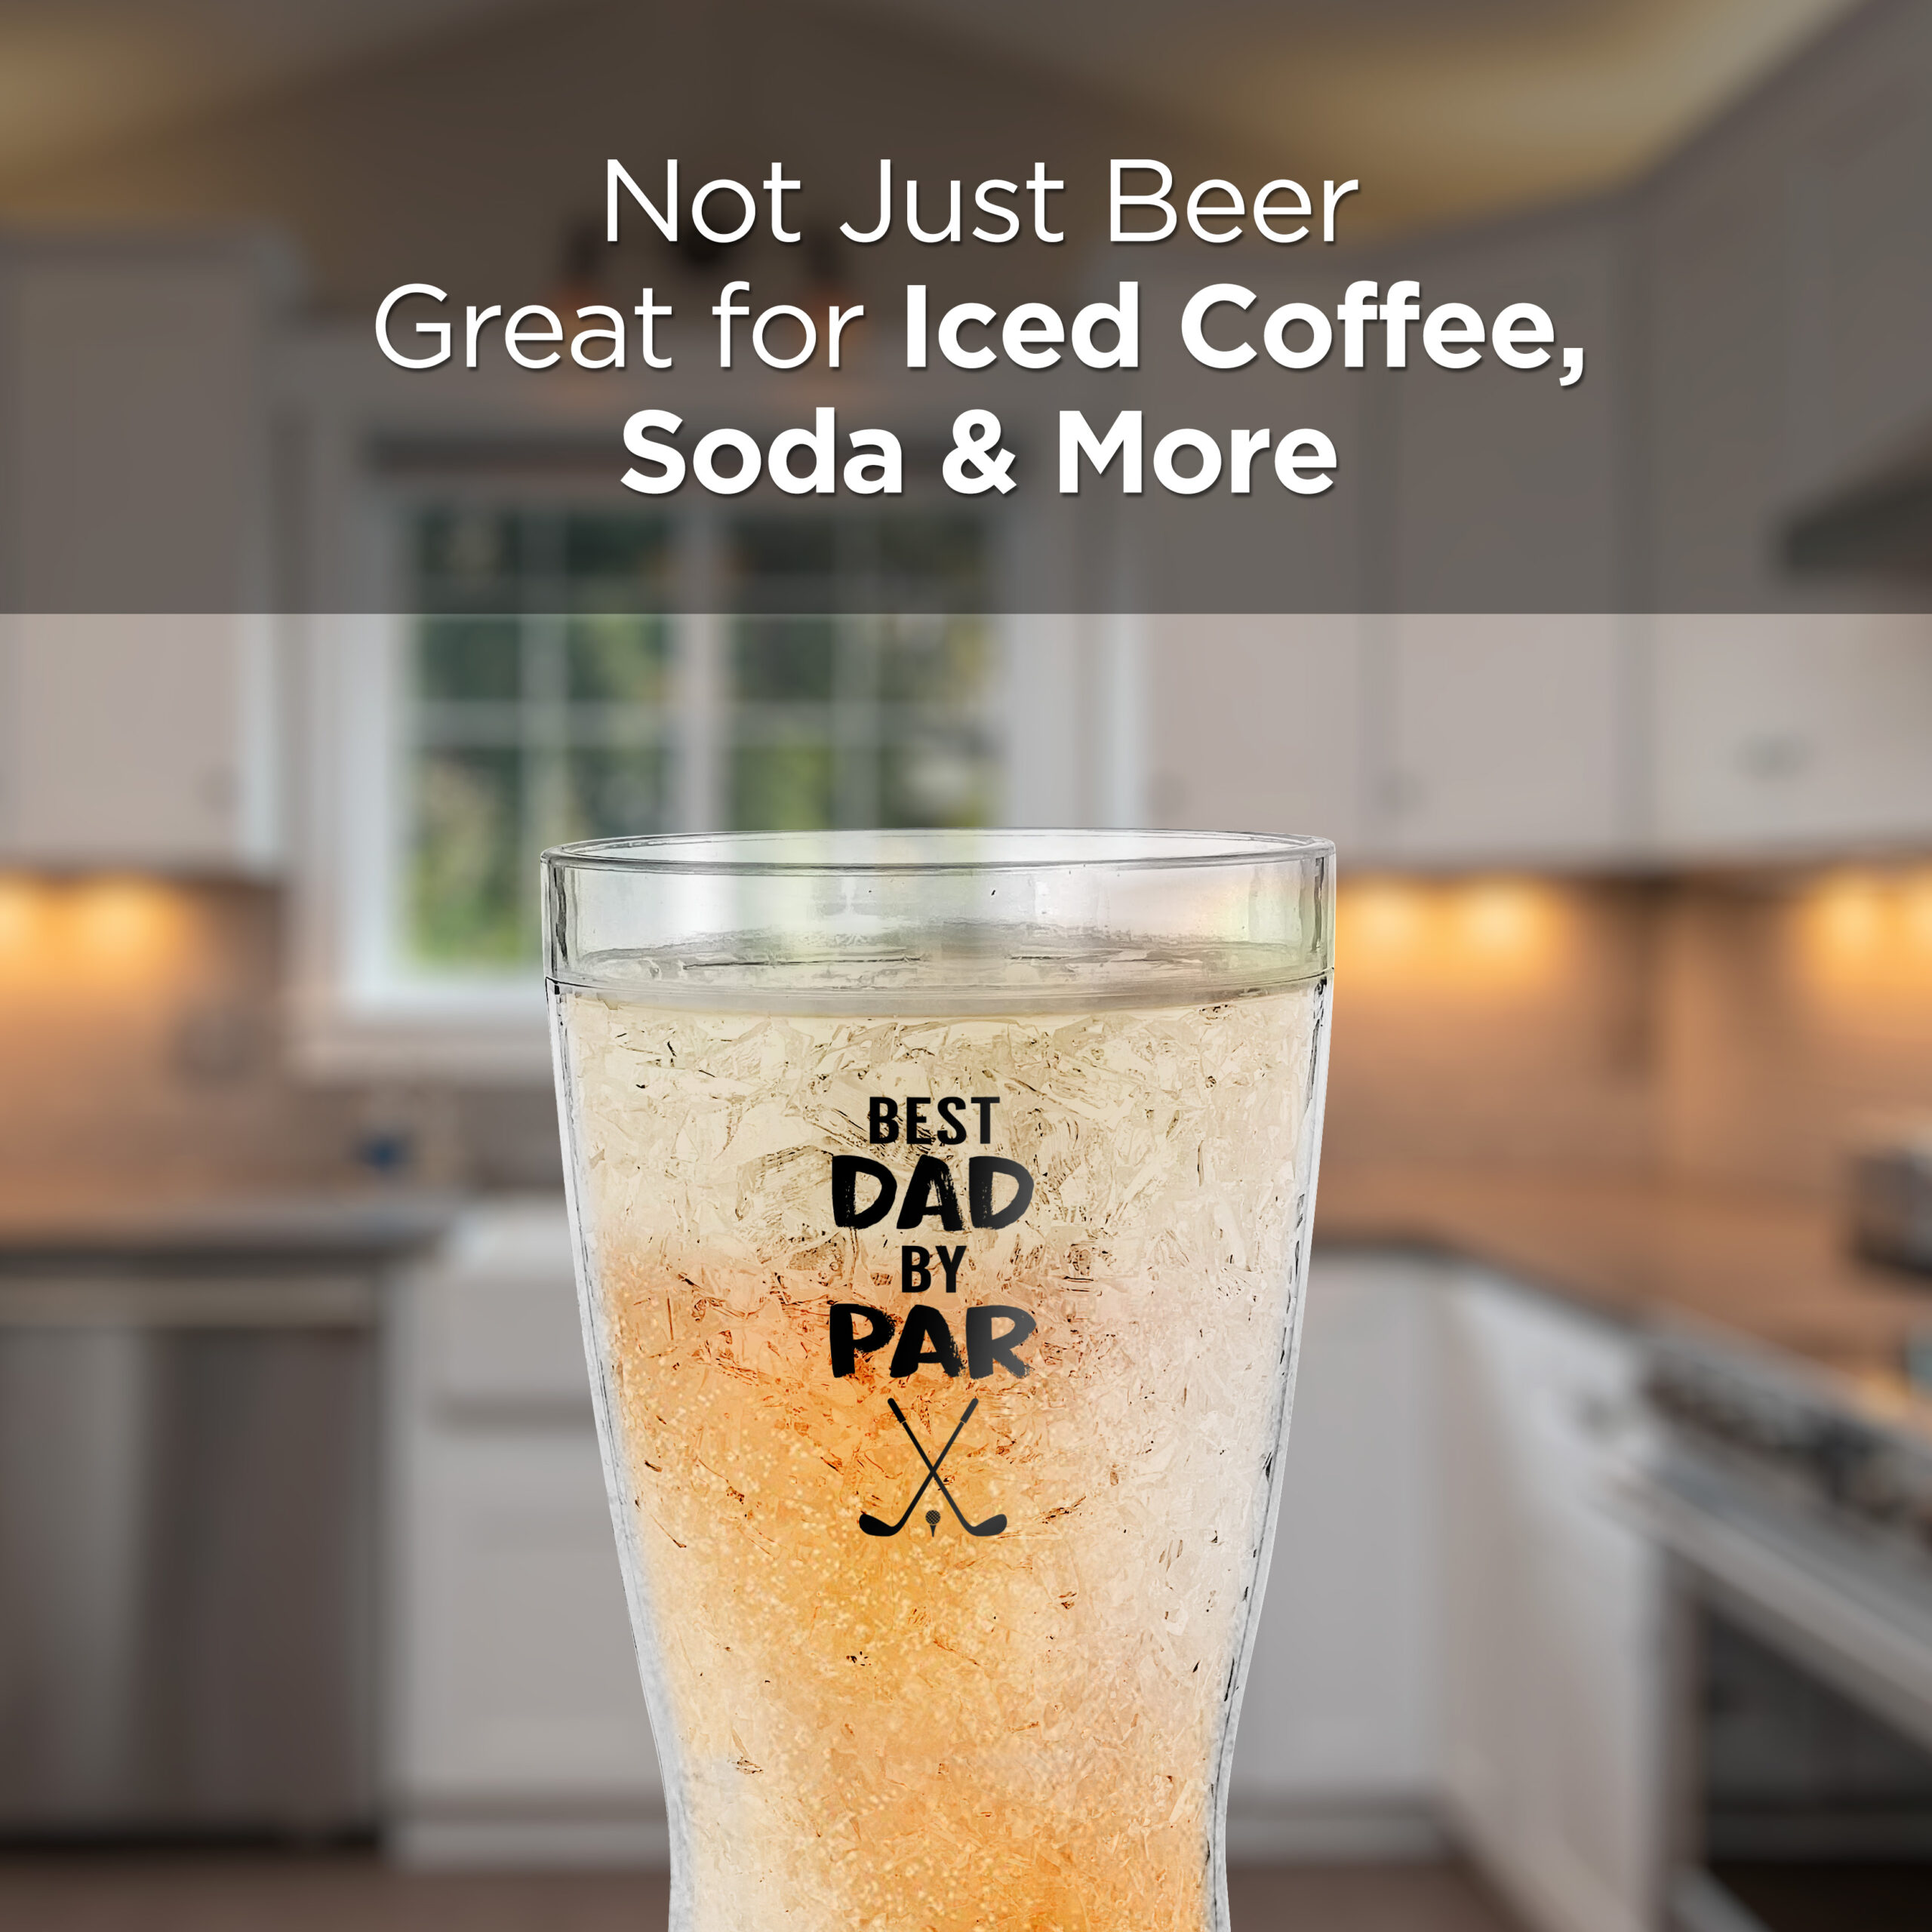 Freezer Mugs With Gel Beer Mugs For Freezer - Frosted Beer Freezer